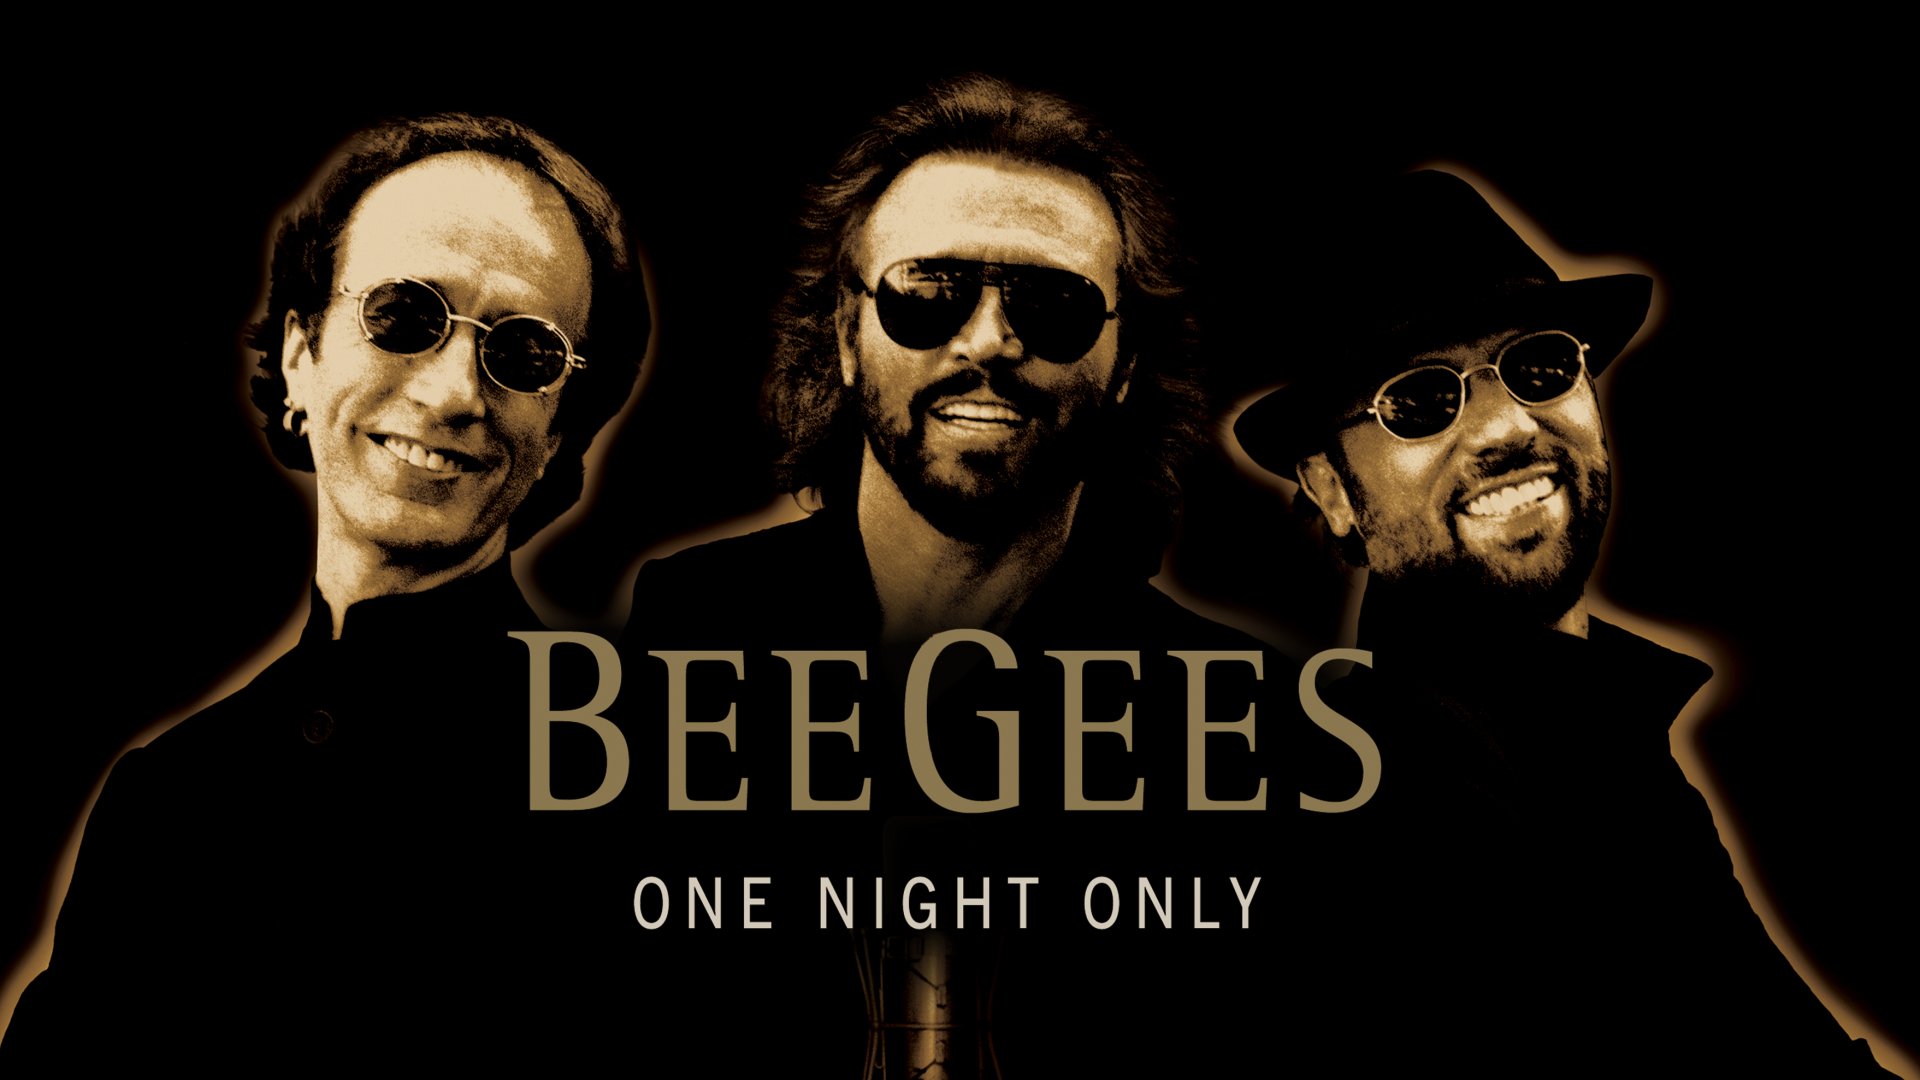 Watch Bee Gees: One Night Only Online - Stream Full Episodes